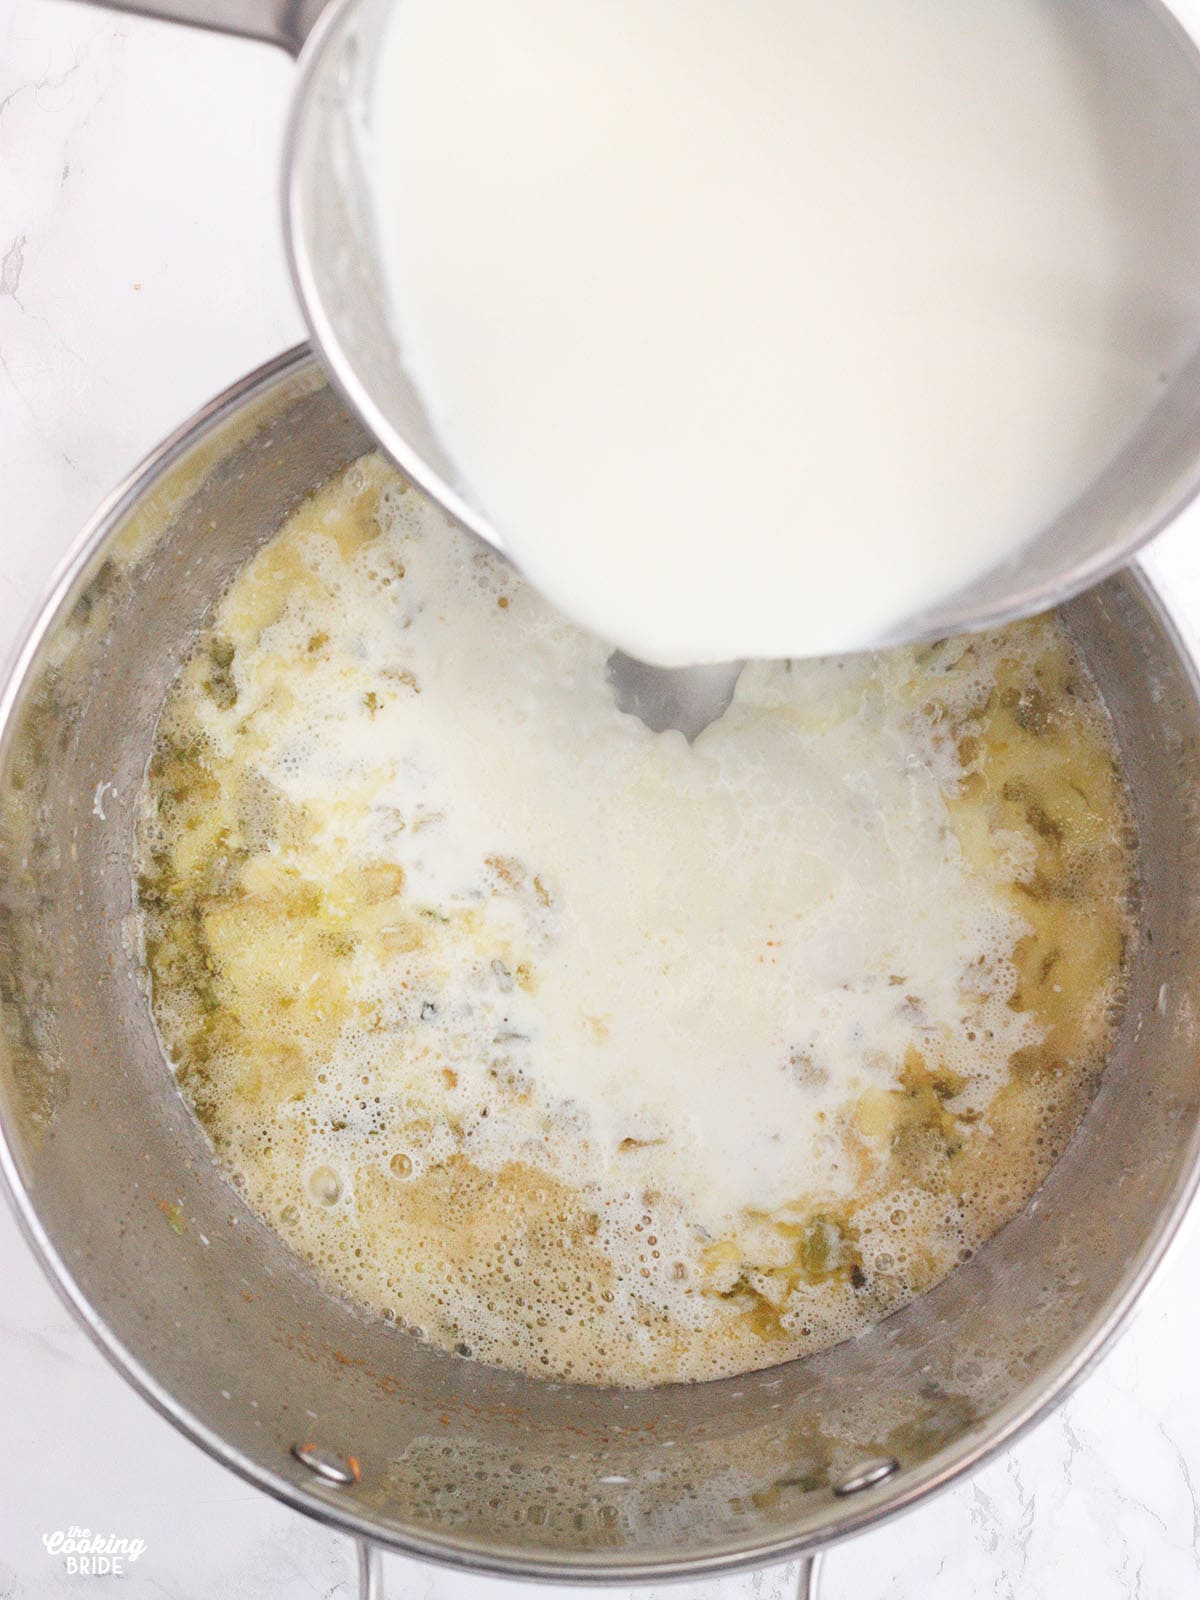 milk and heavy cream being poured from a saucepan into a stockpot of sautéed vegetables